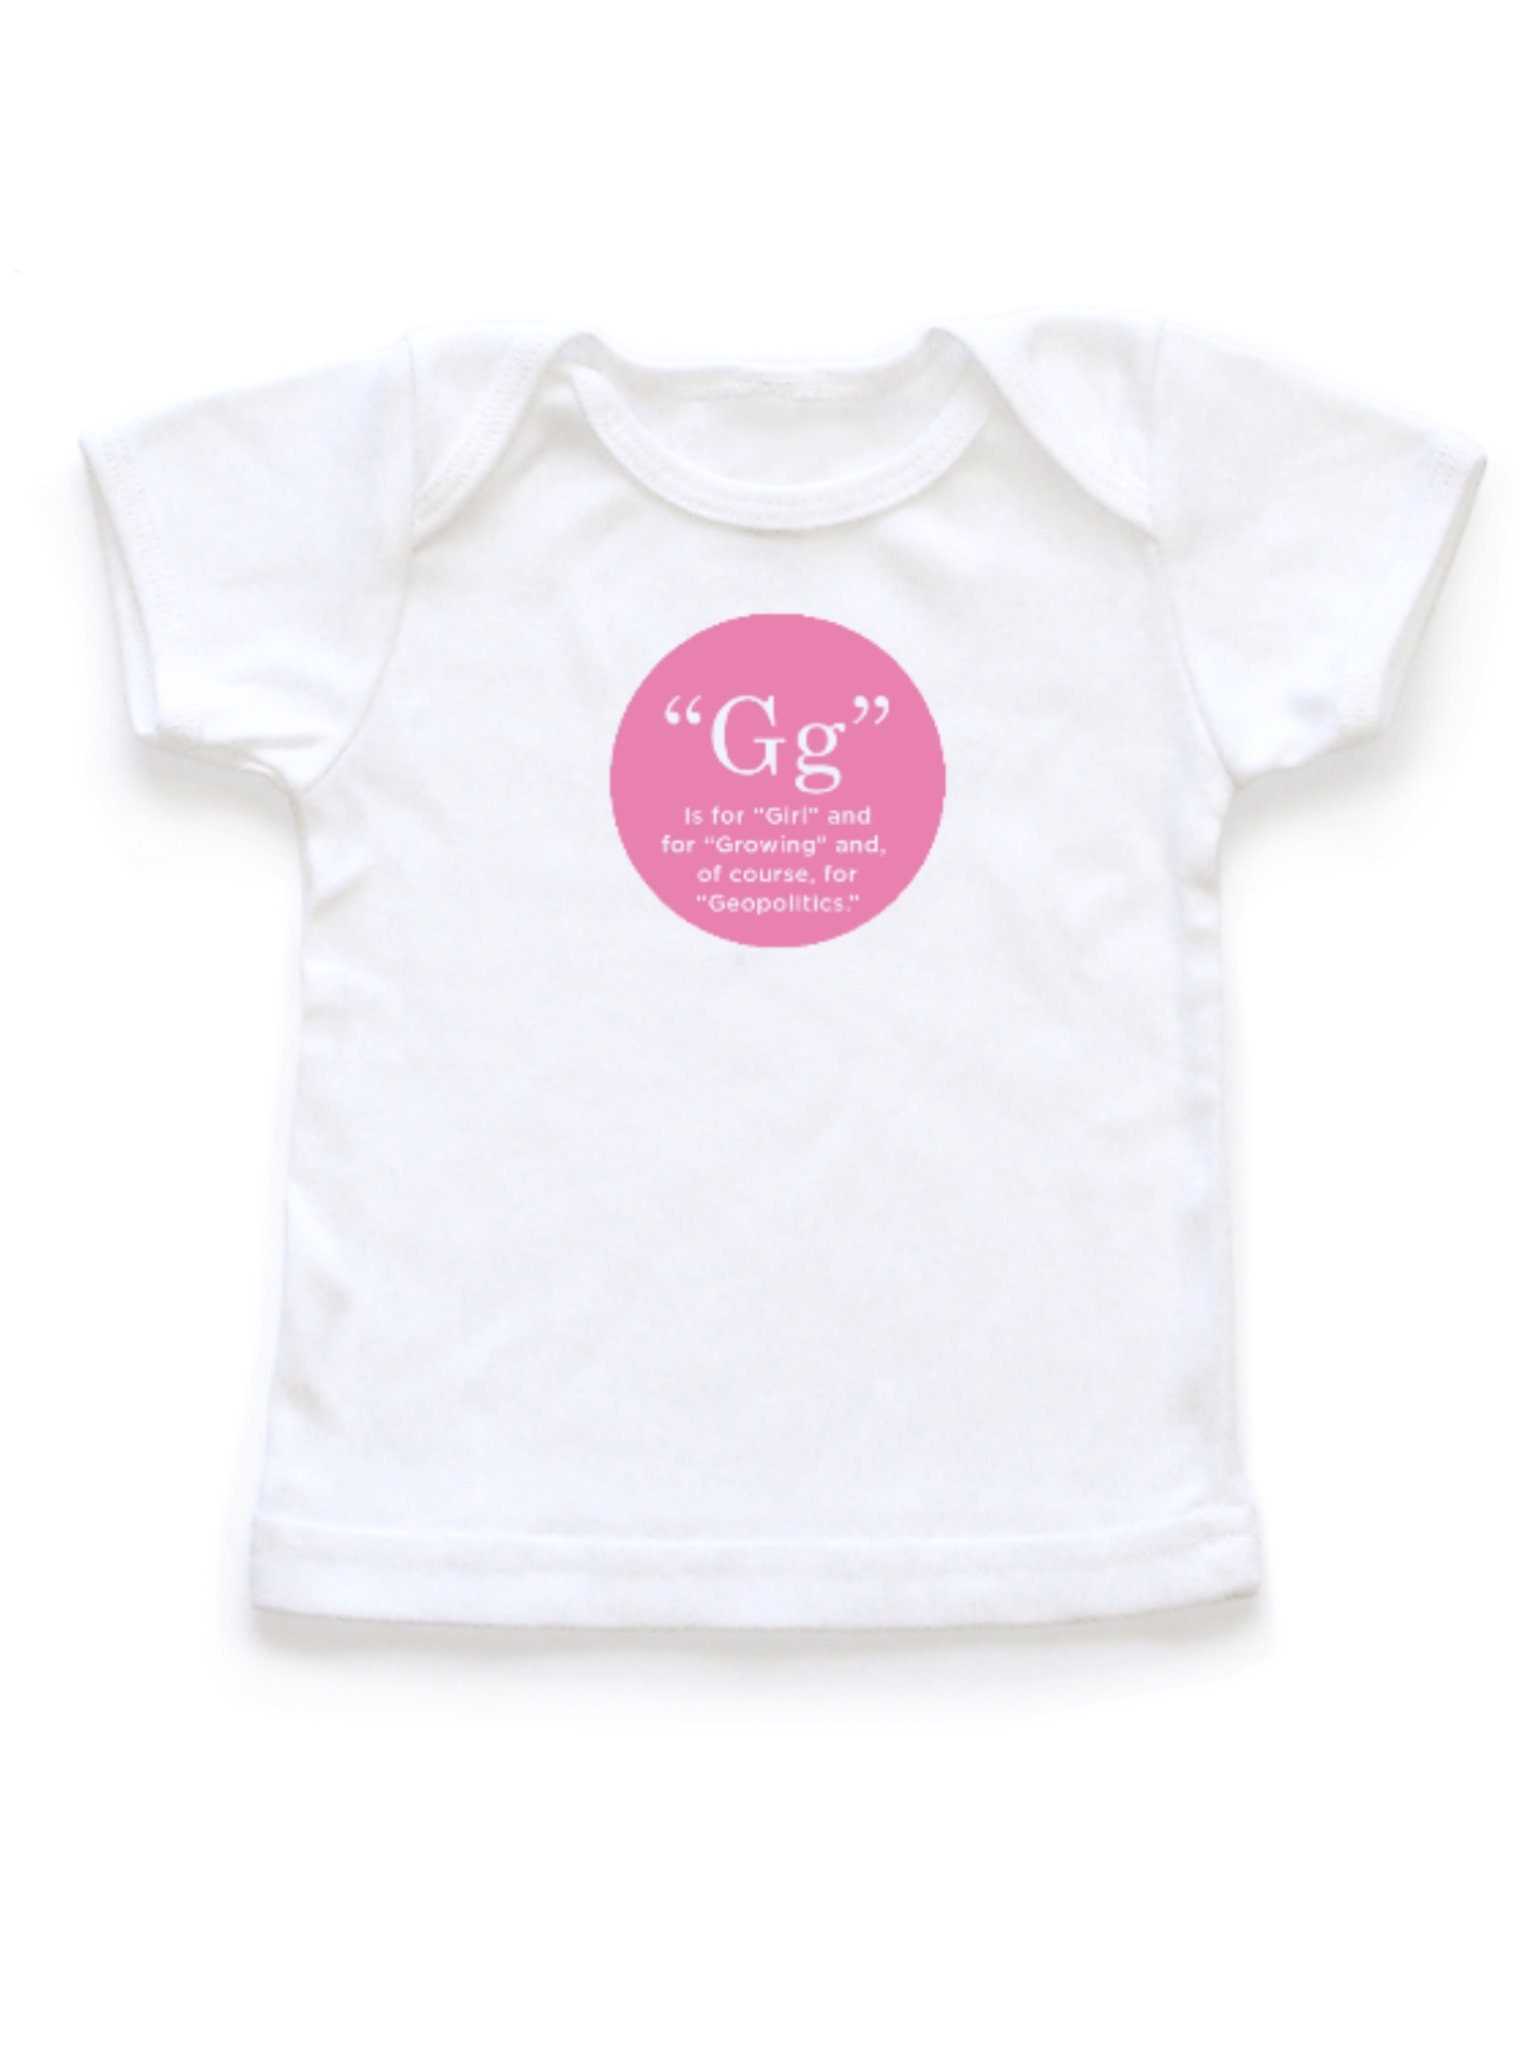 G is for Girl - Etsy